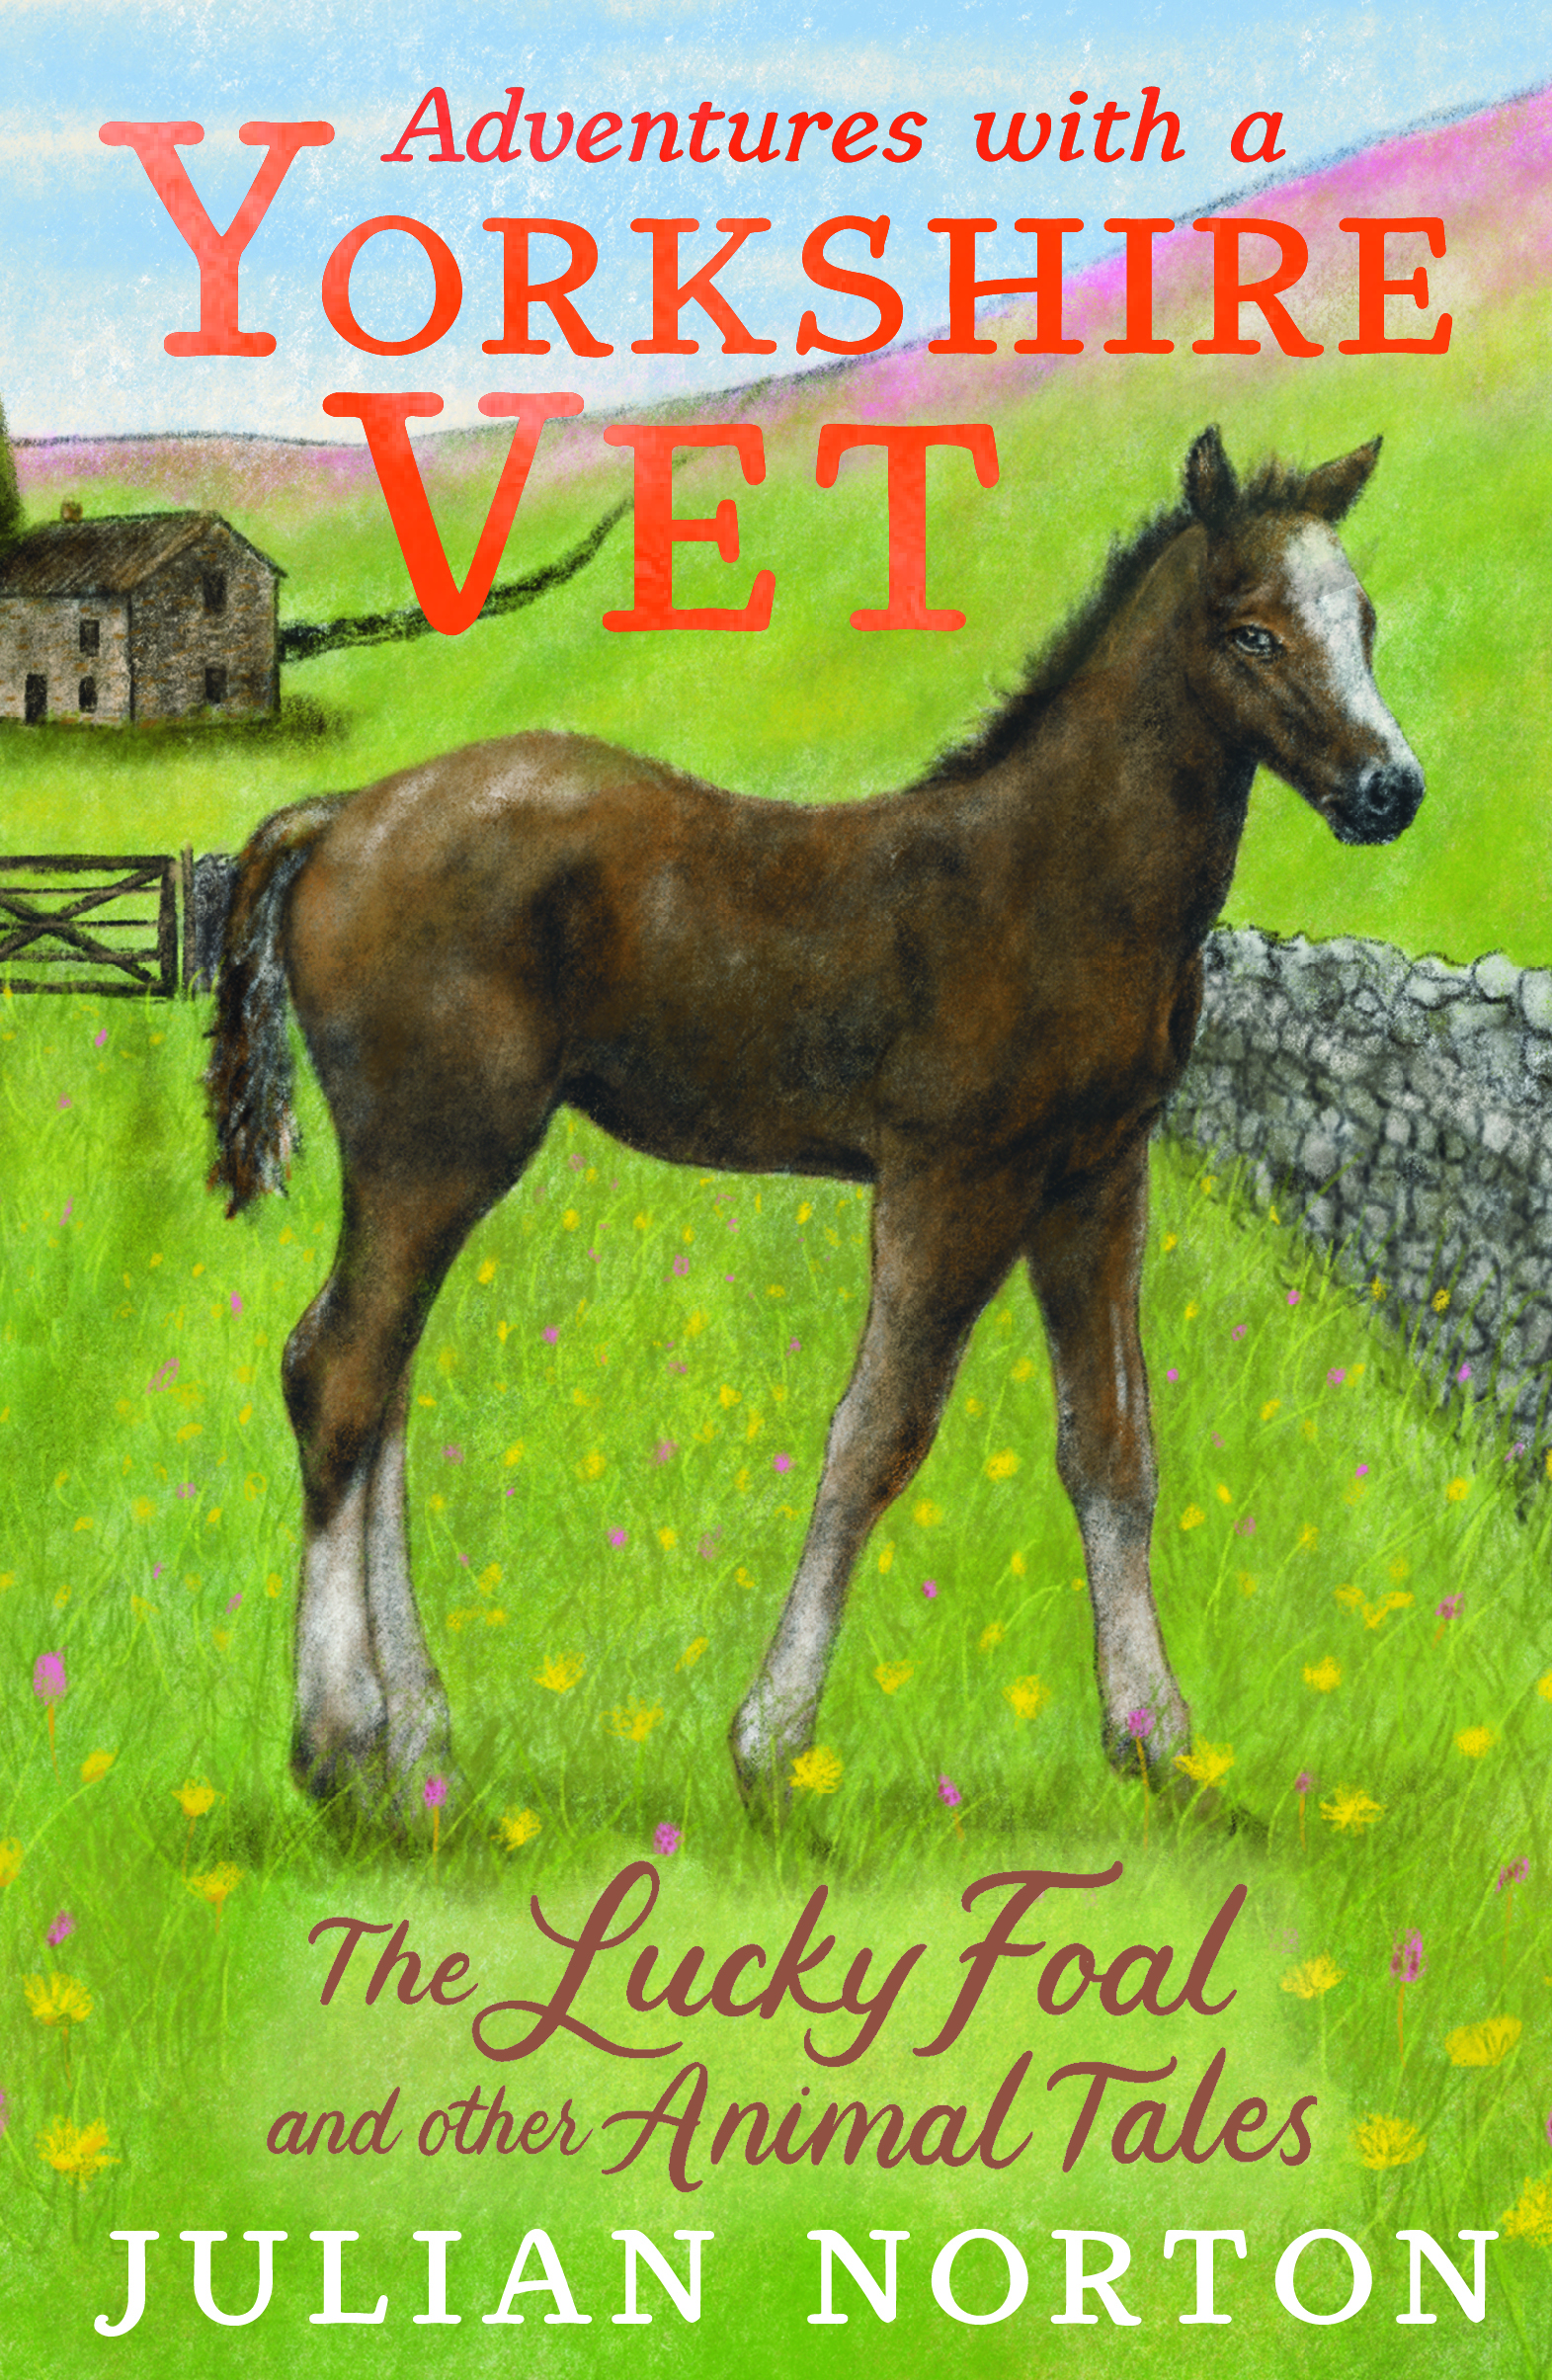 Adventures-with-a-Yorkshire-Vet-The-Lucky-Foal-and-Other-Animal-Tales